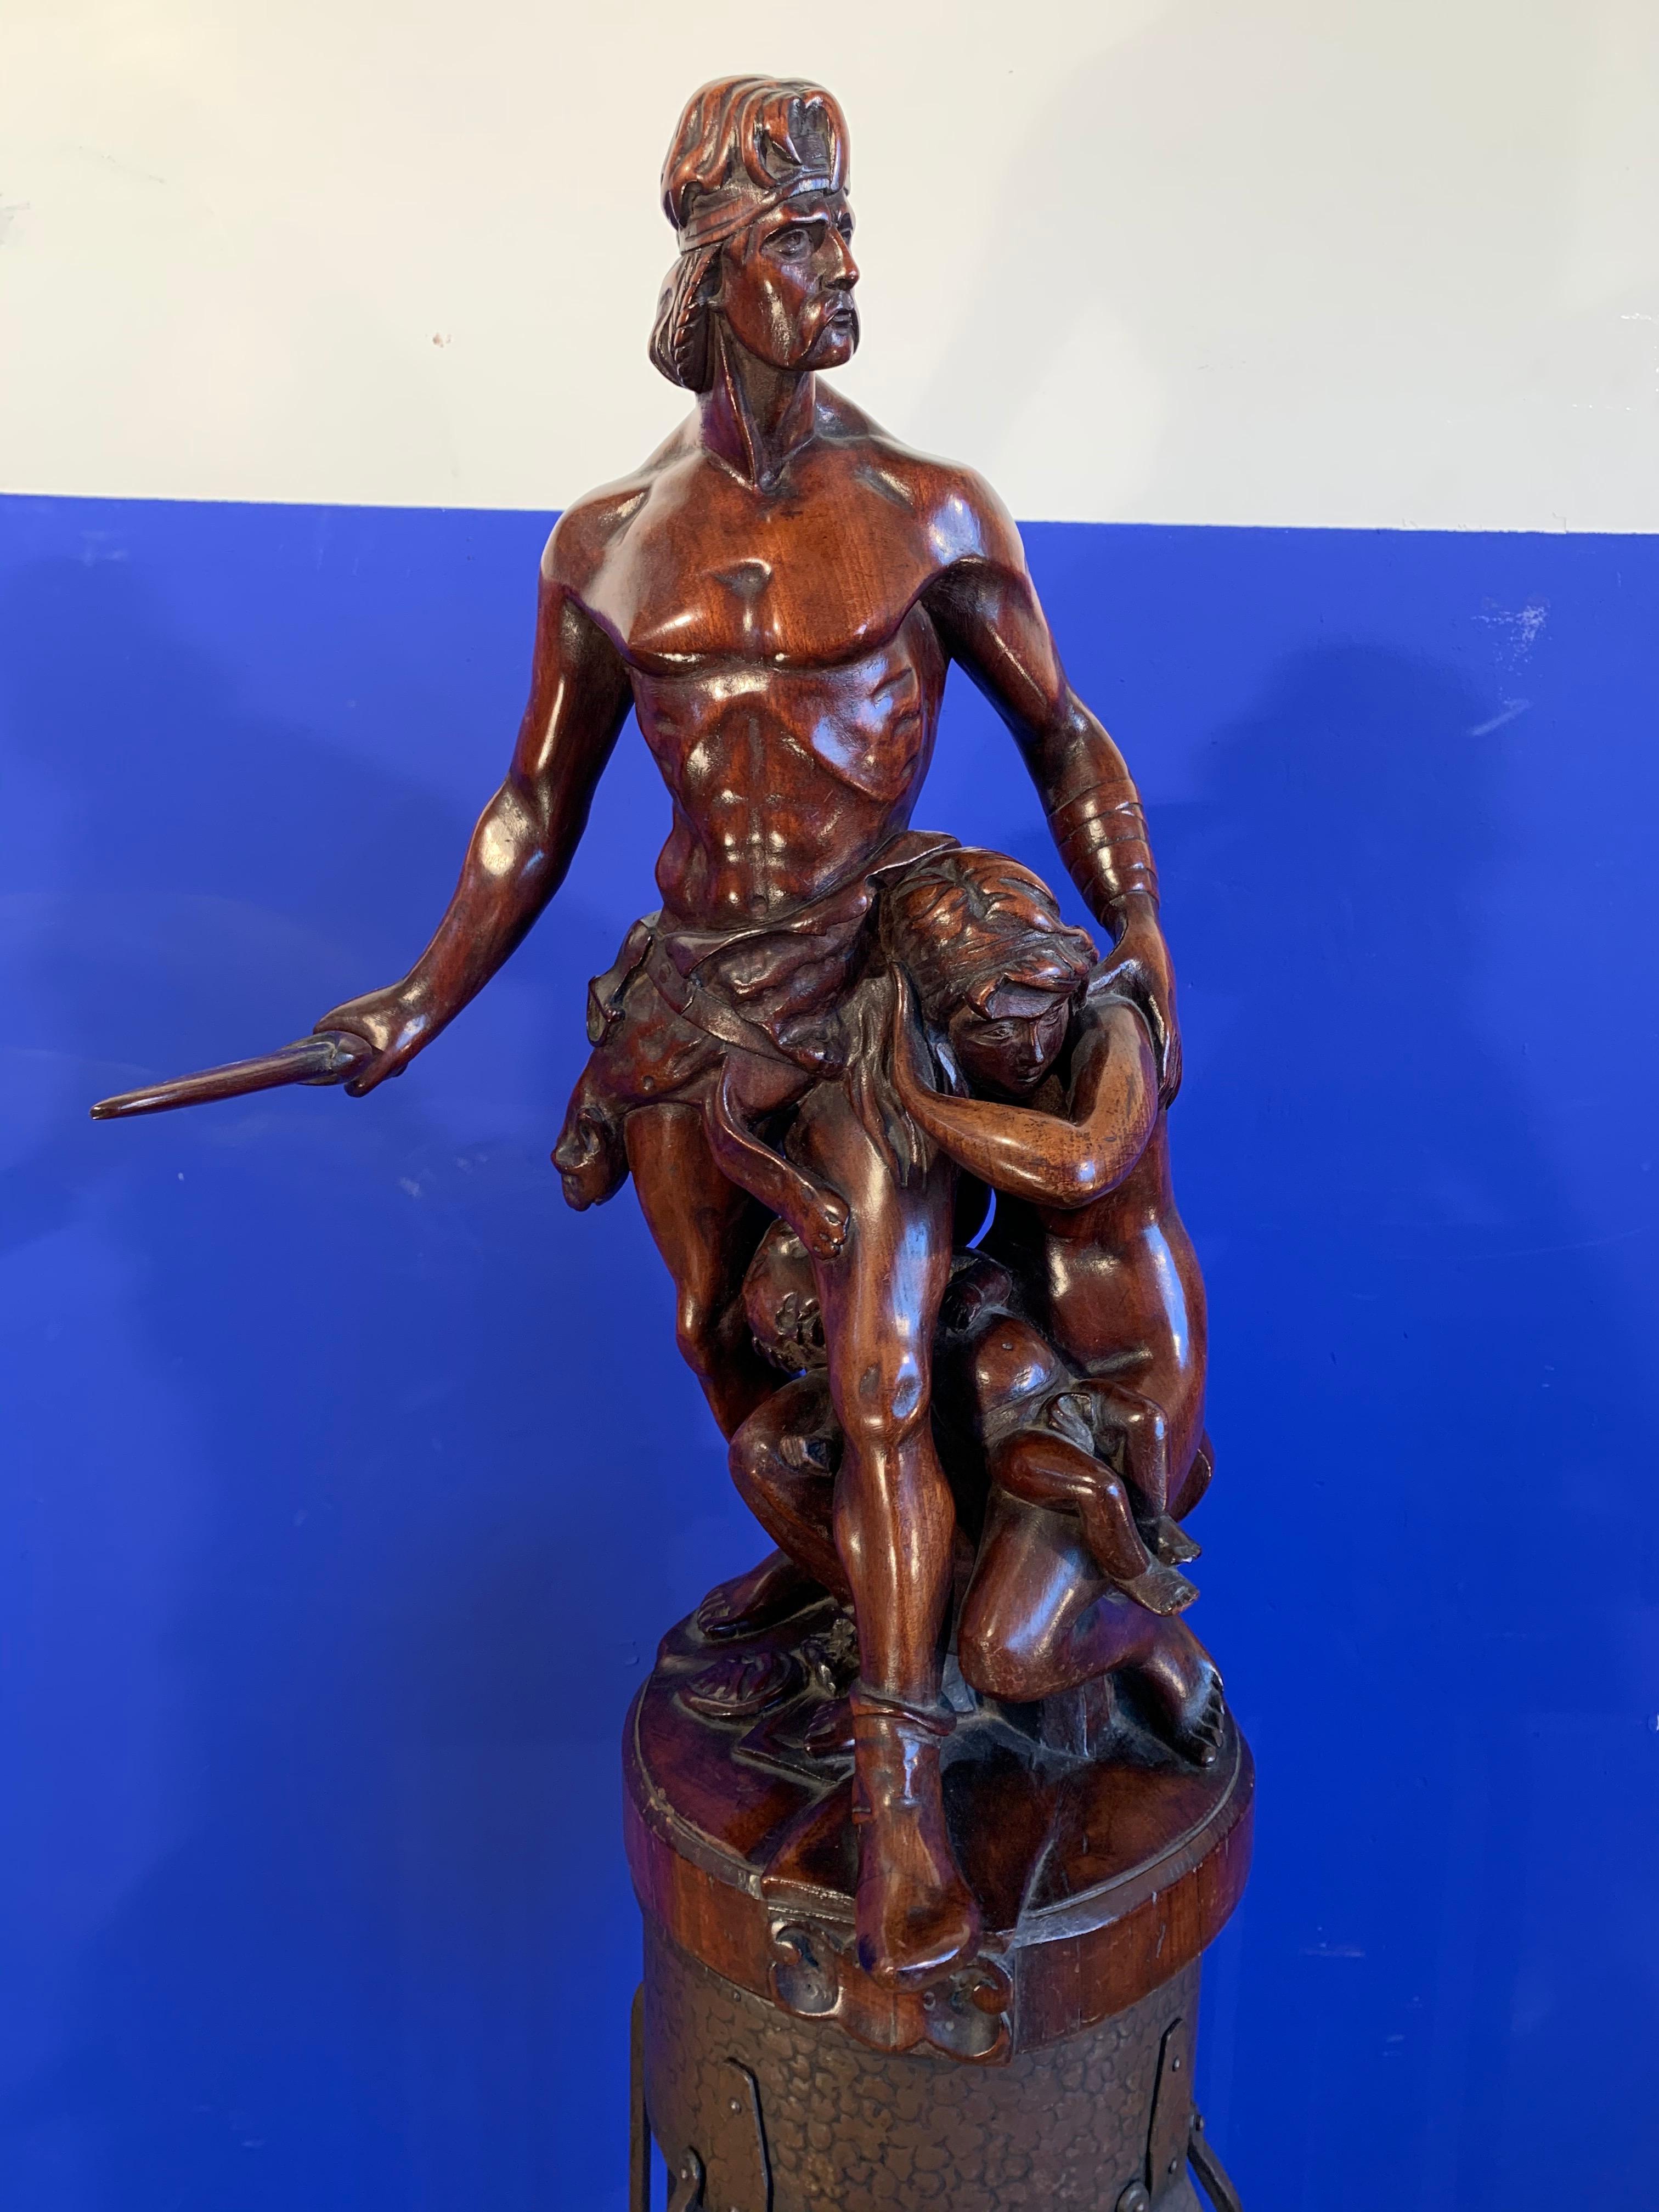 One of a Kind Antique Carved Wood Group Statue Sculpture by Emile Boisseau For Sale 9